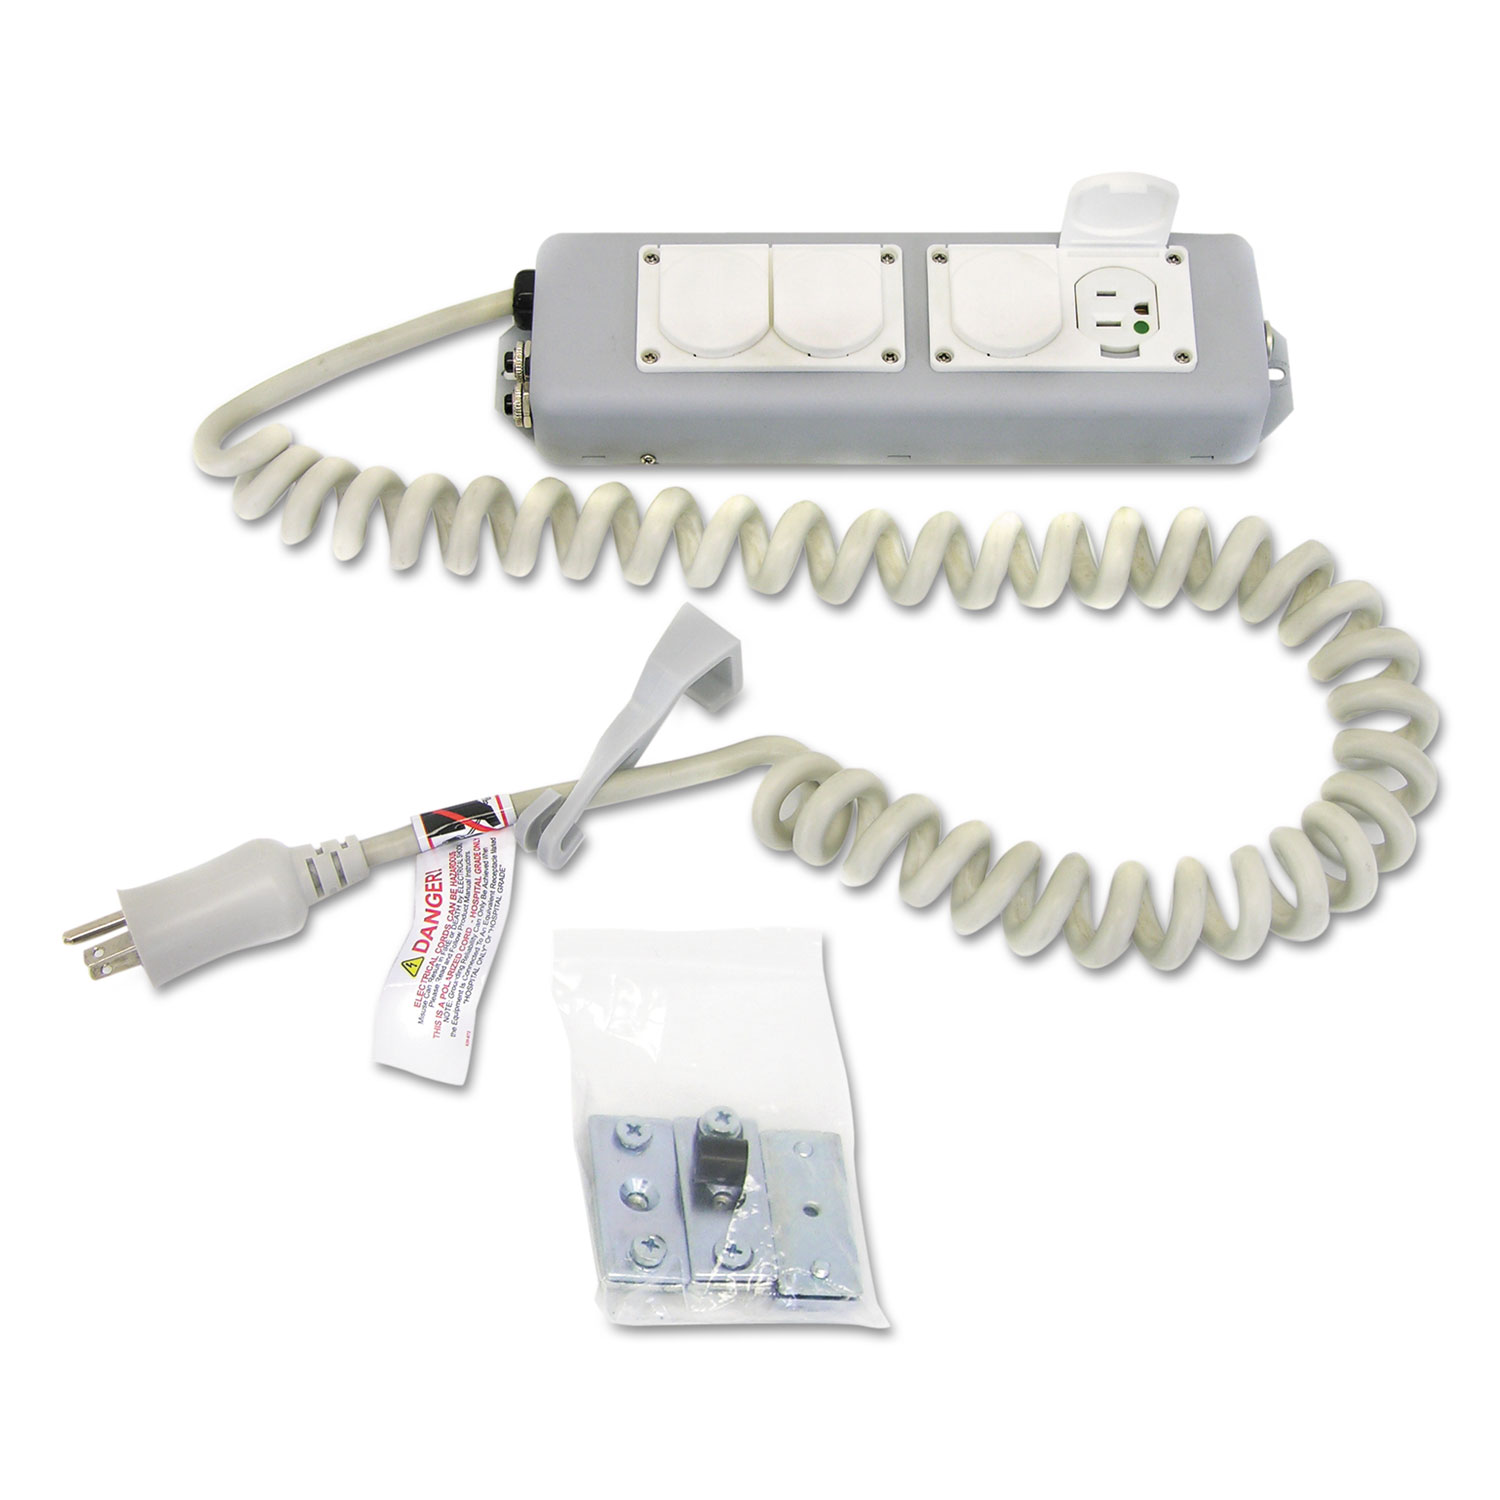  Ergotron 97-466-214 Medical-Grade Power Strip for Patient-Care Vicinity, 4 Outlets, 4 ft Cord (ERG97466214) 